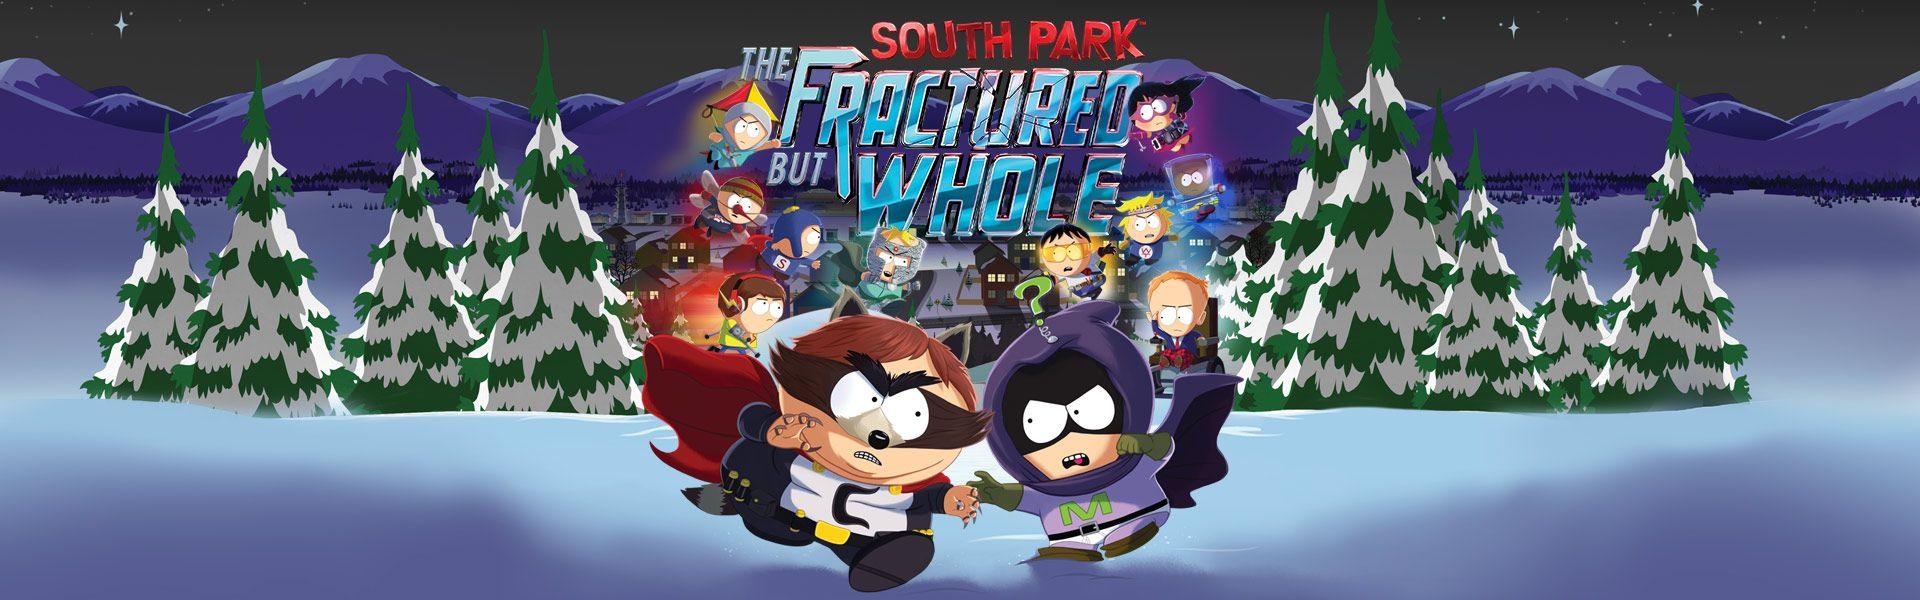 south park the fractured but whole other gender